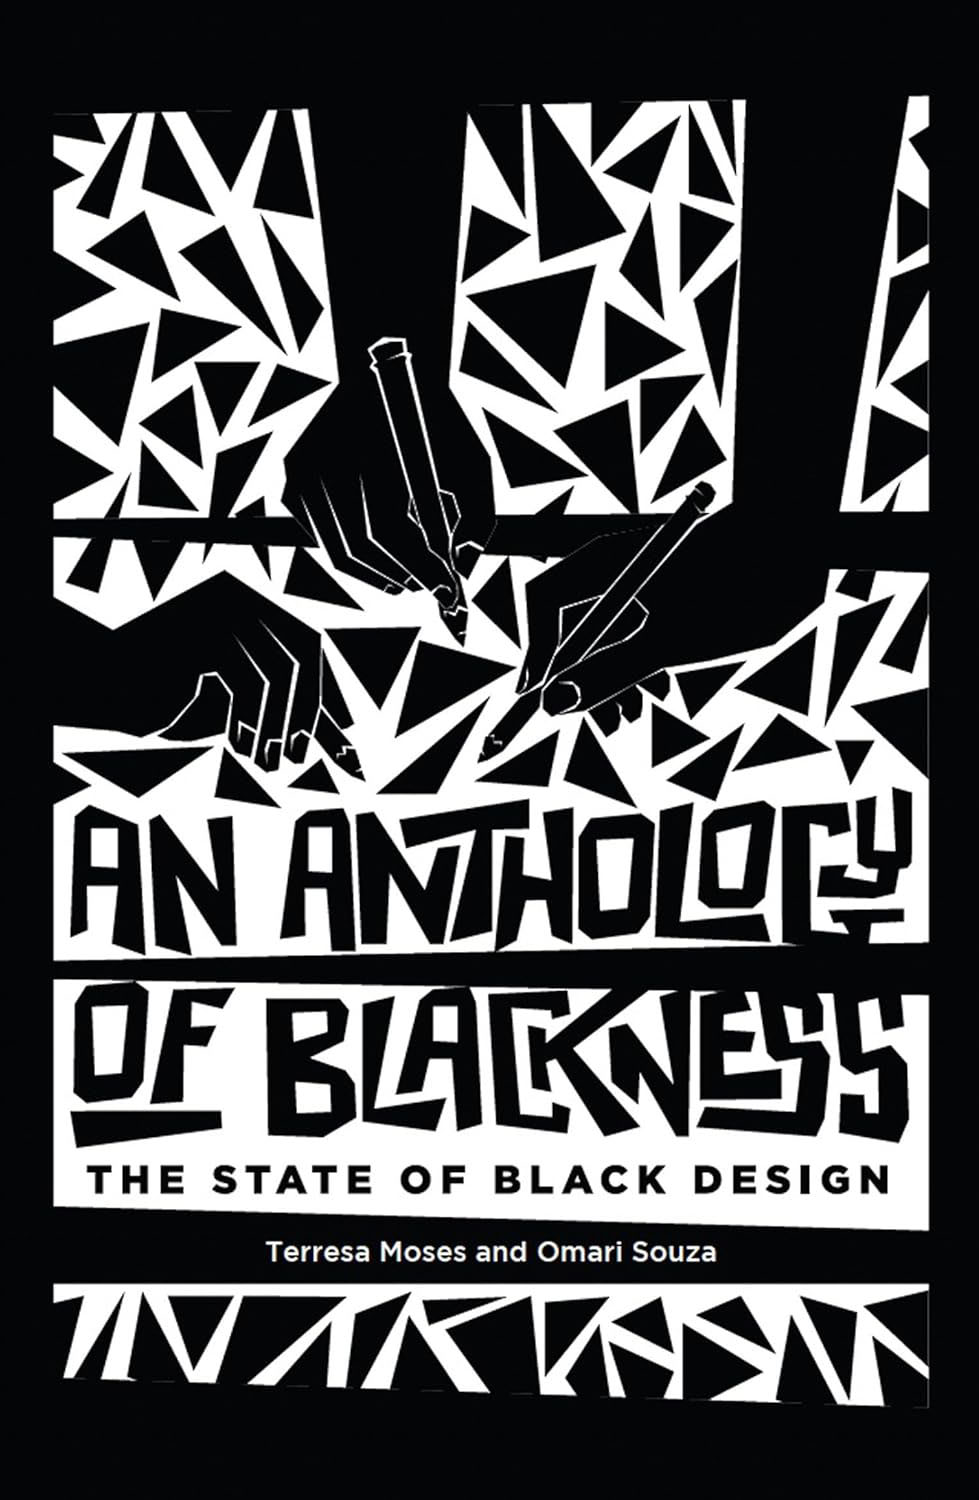 "An Anthology of Blackness"